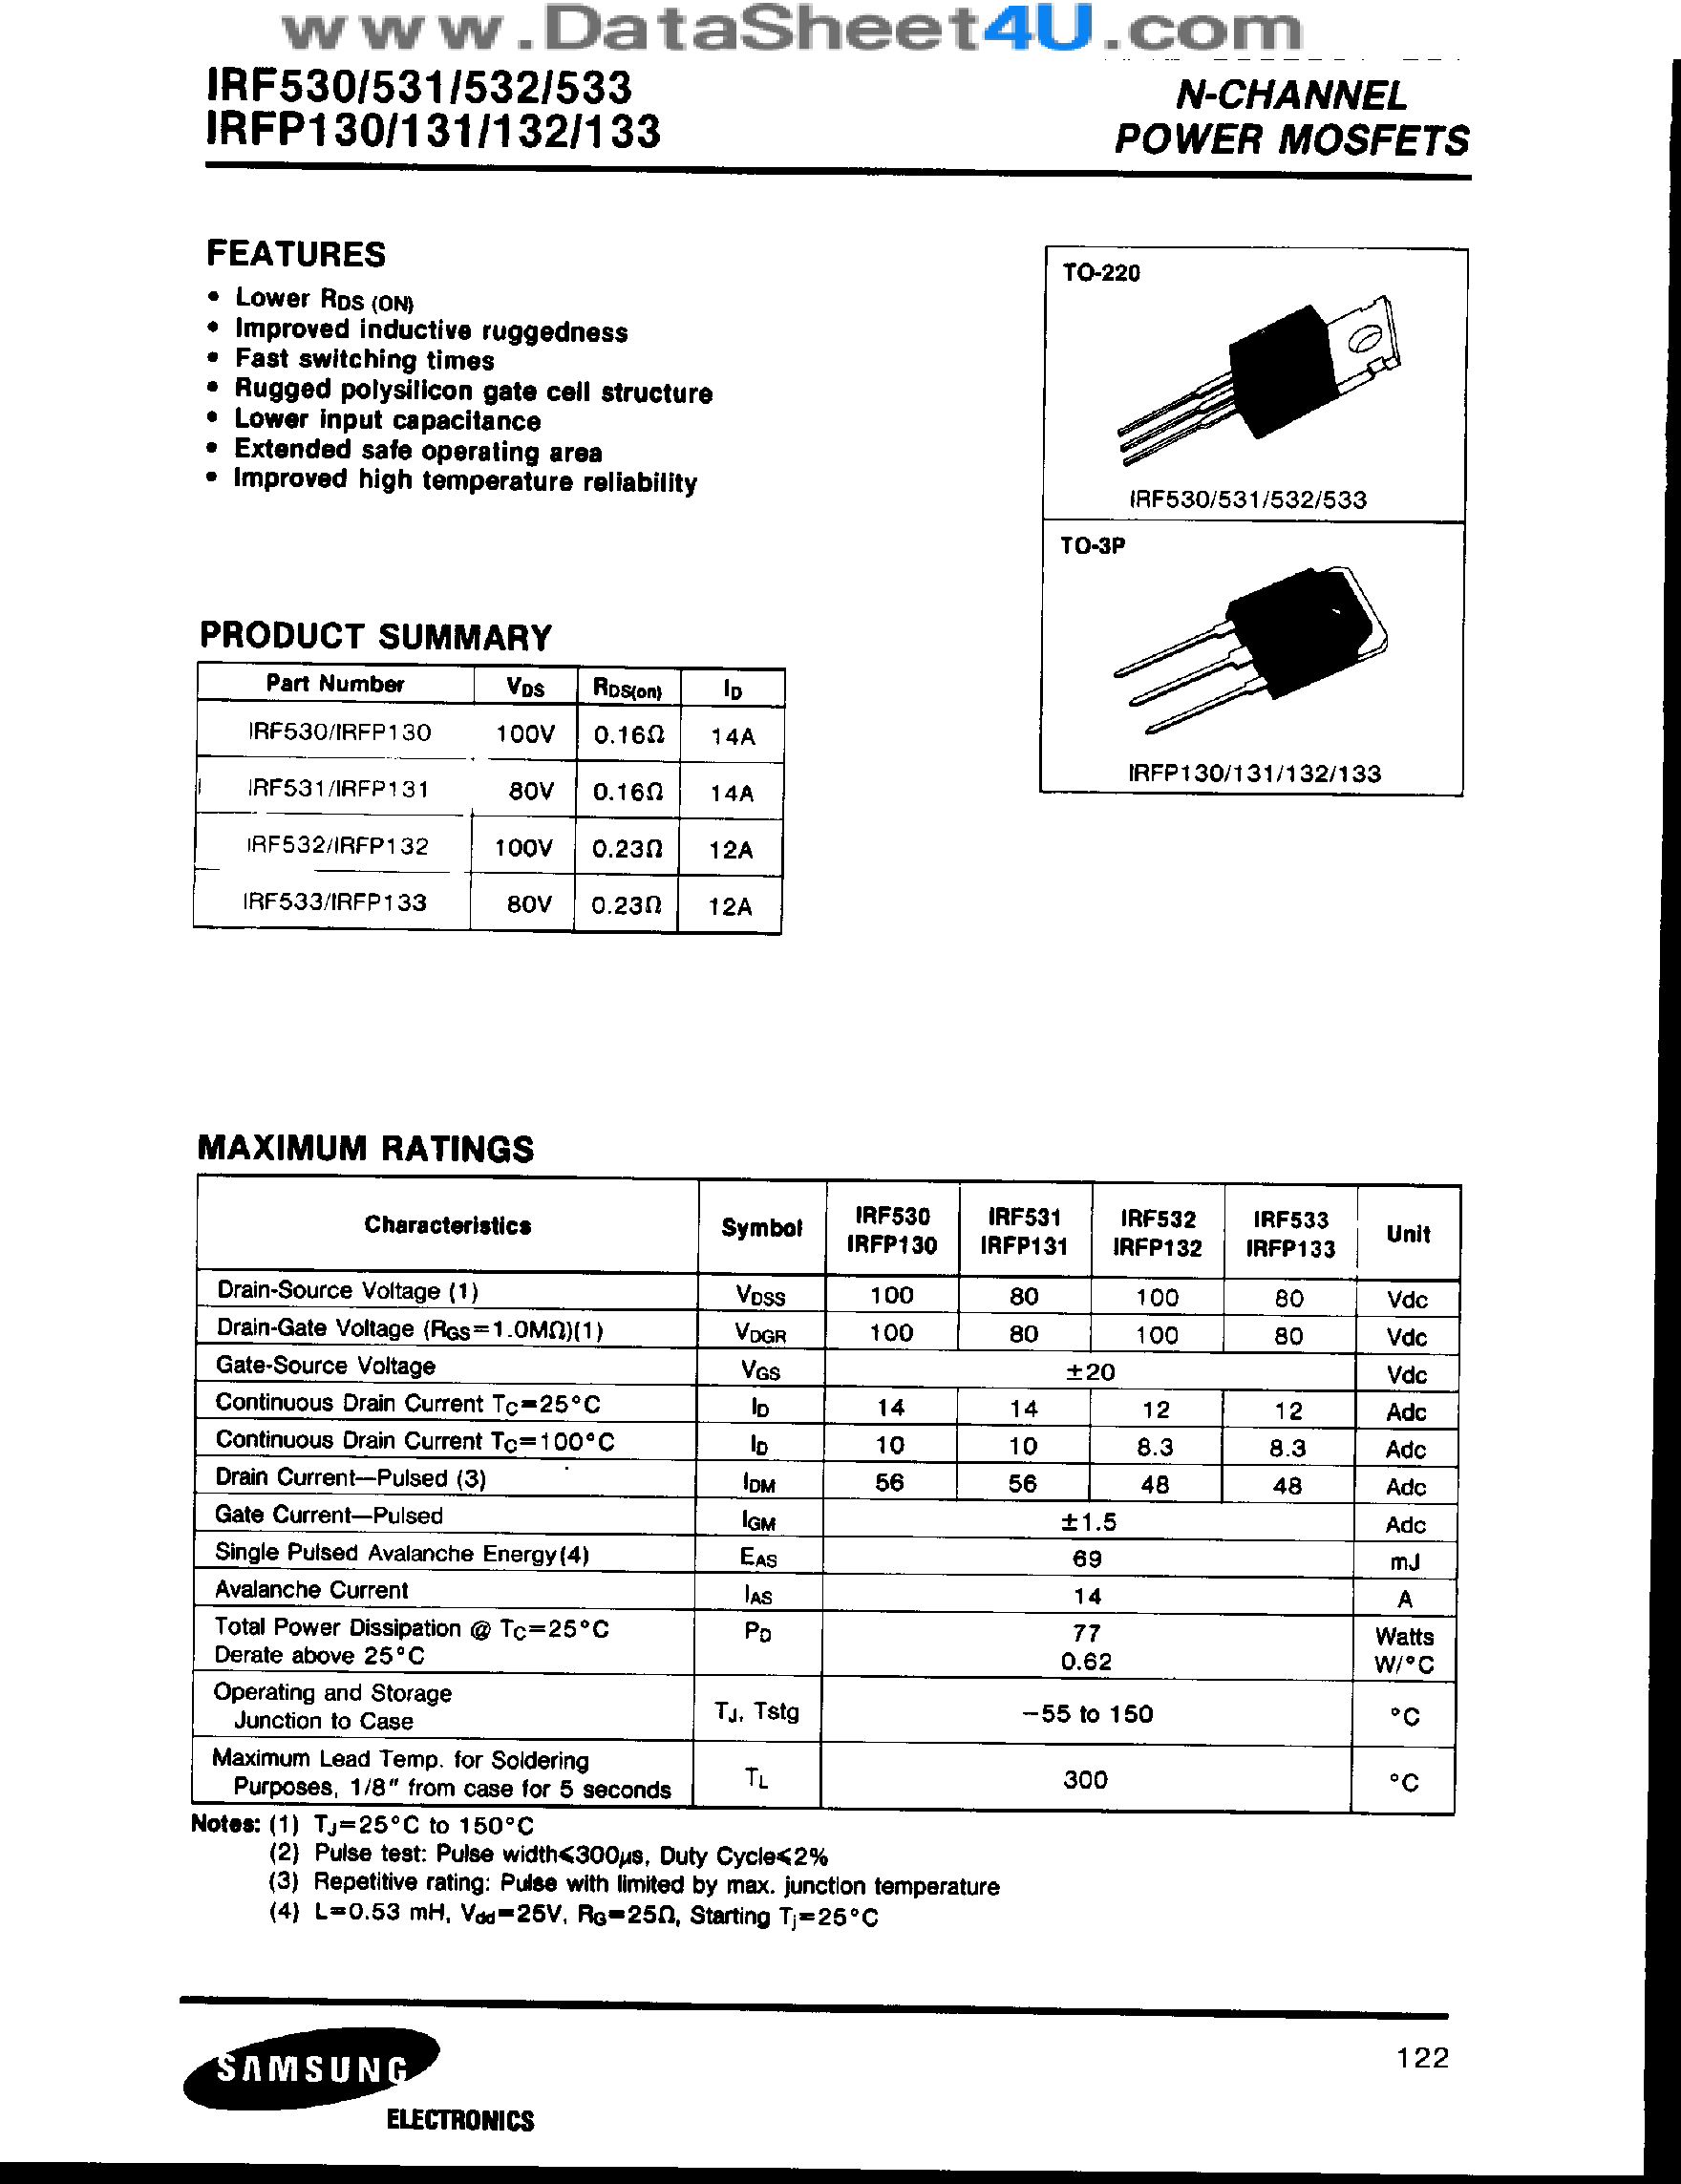 Даташит IRF530 - (IRF530 - IRF533) N-CHANNEL POWER MOSFETS страница 1